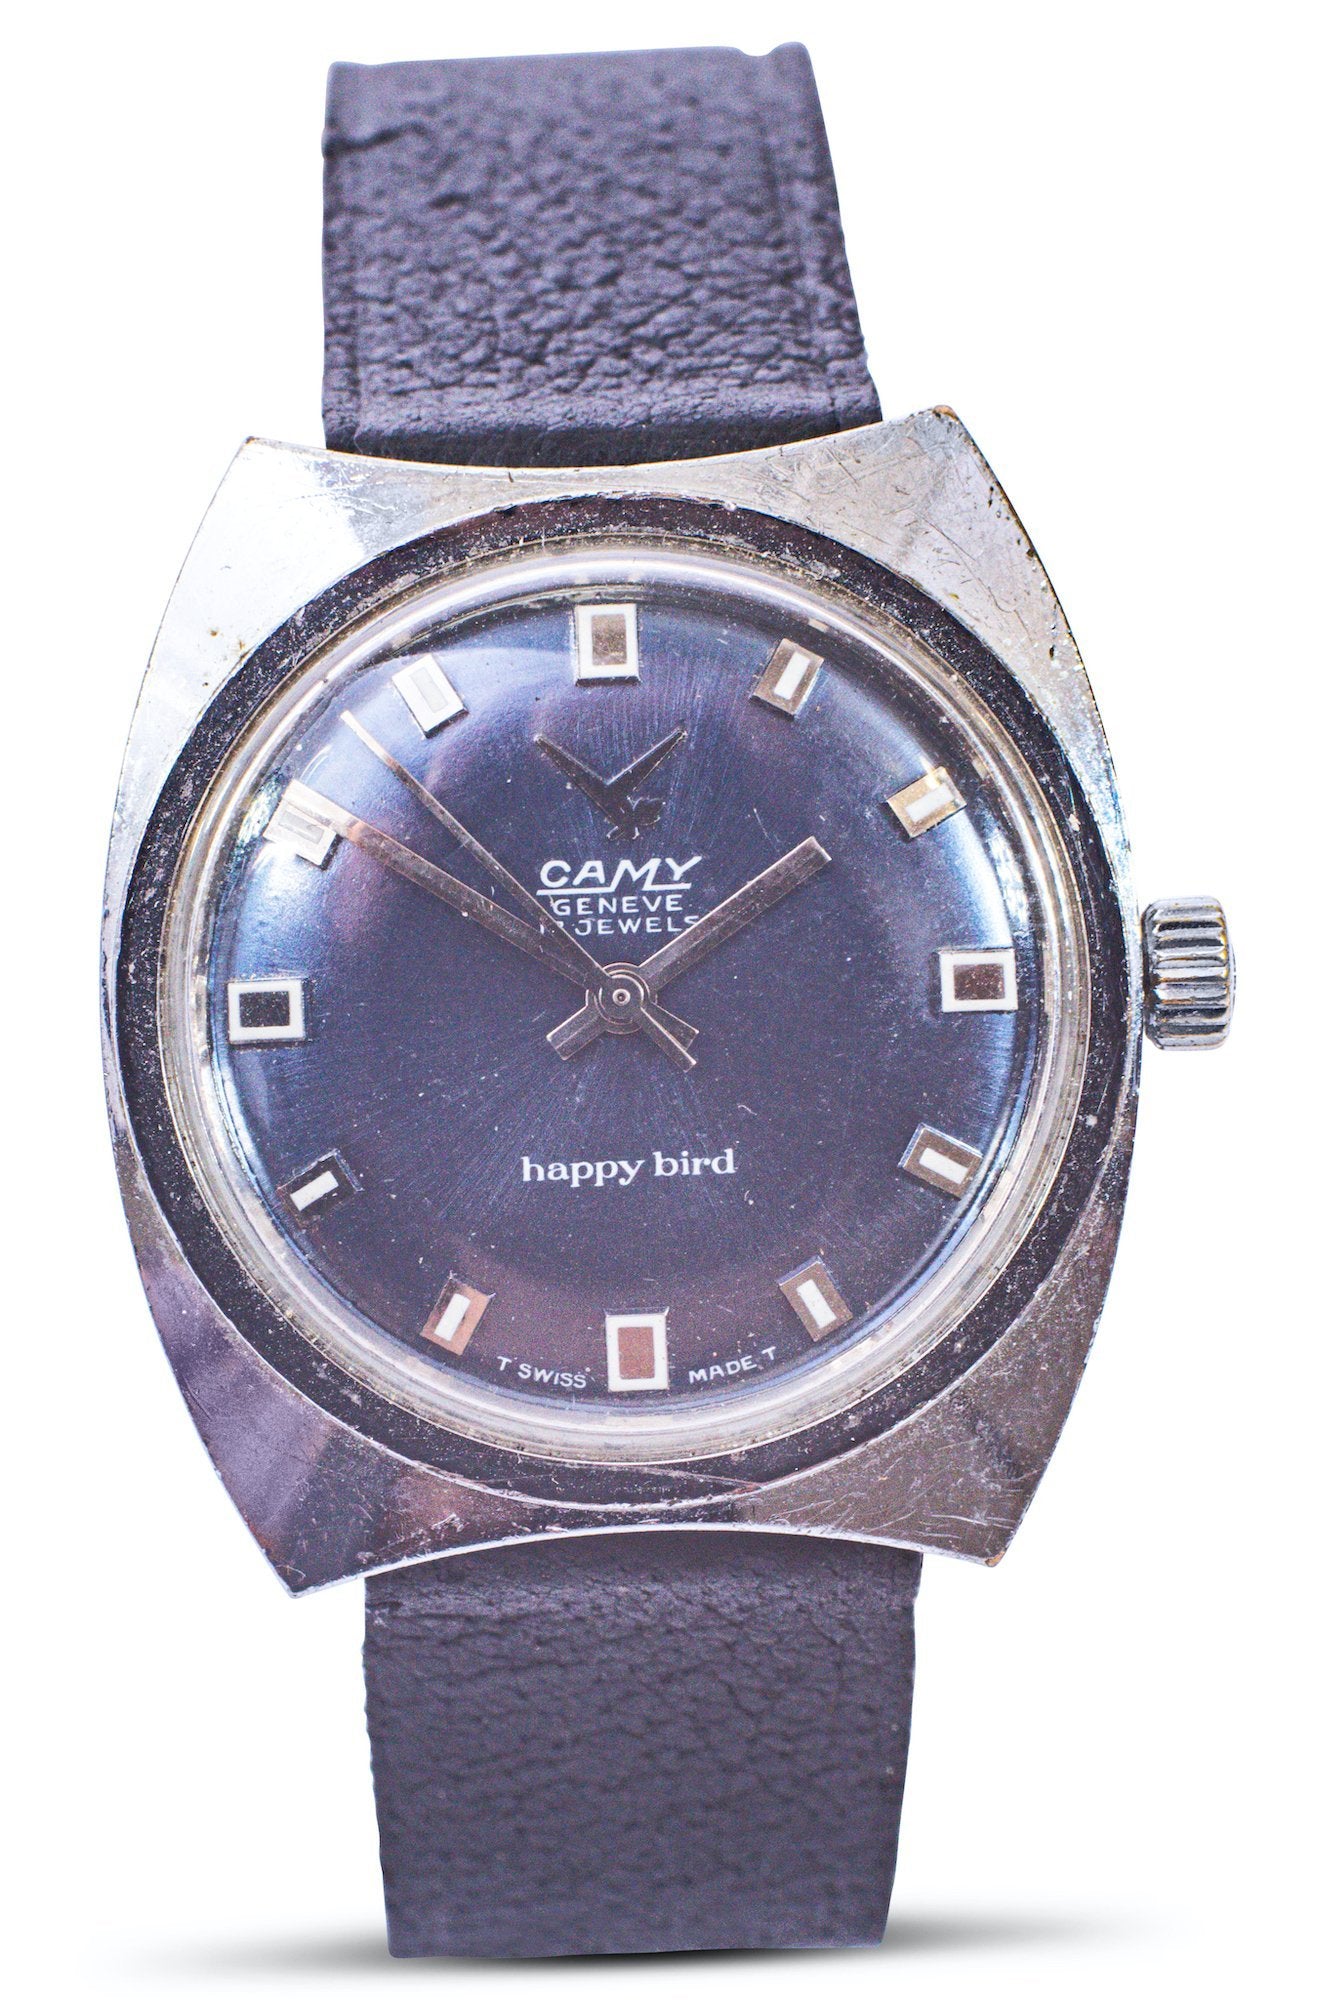 Camy Geneve Happy Bird 6310 - Counting Time Watch Purveyors